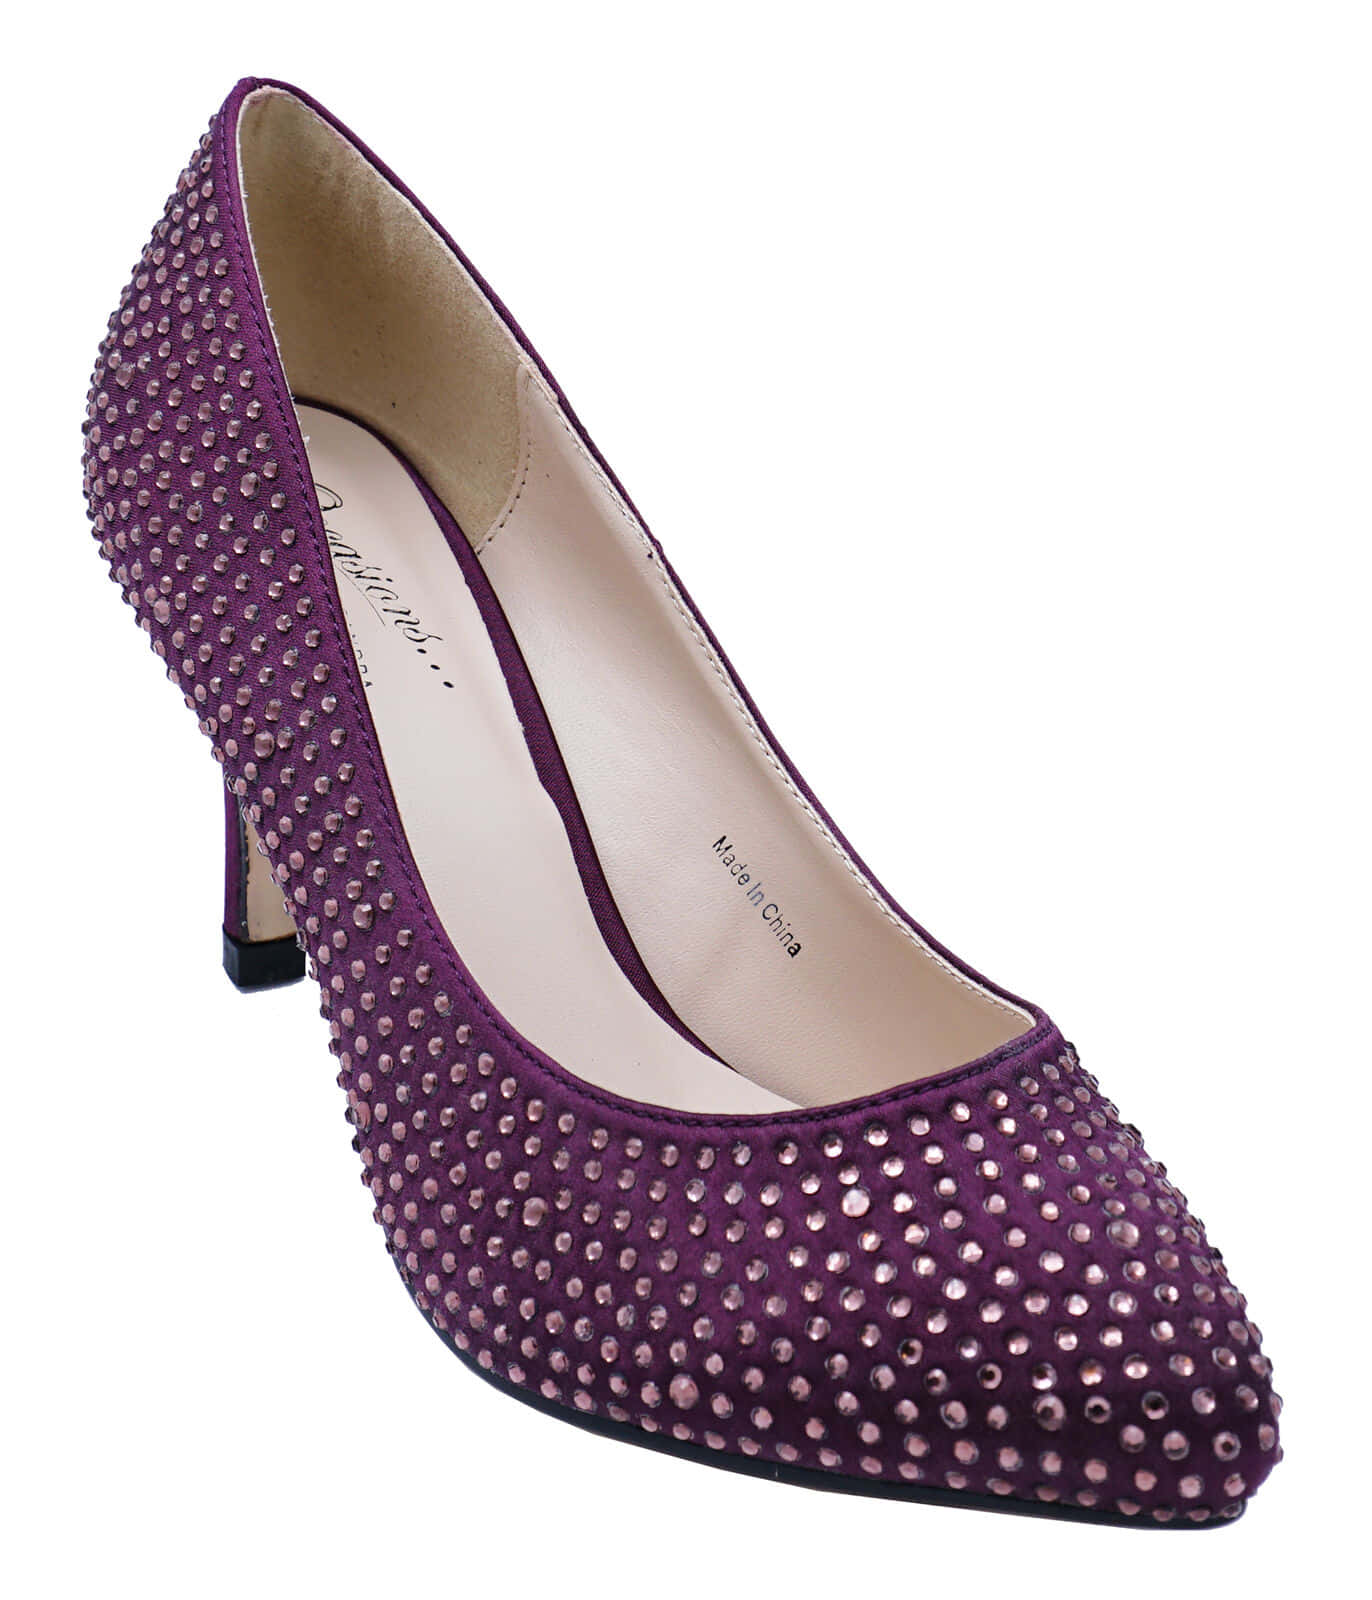 “Make A Statement with These Signature Purple Shoes” Wallpaper